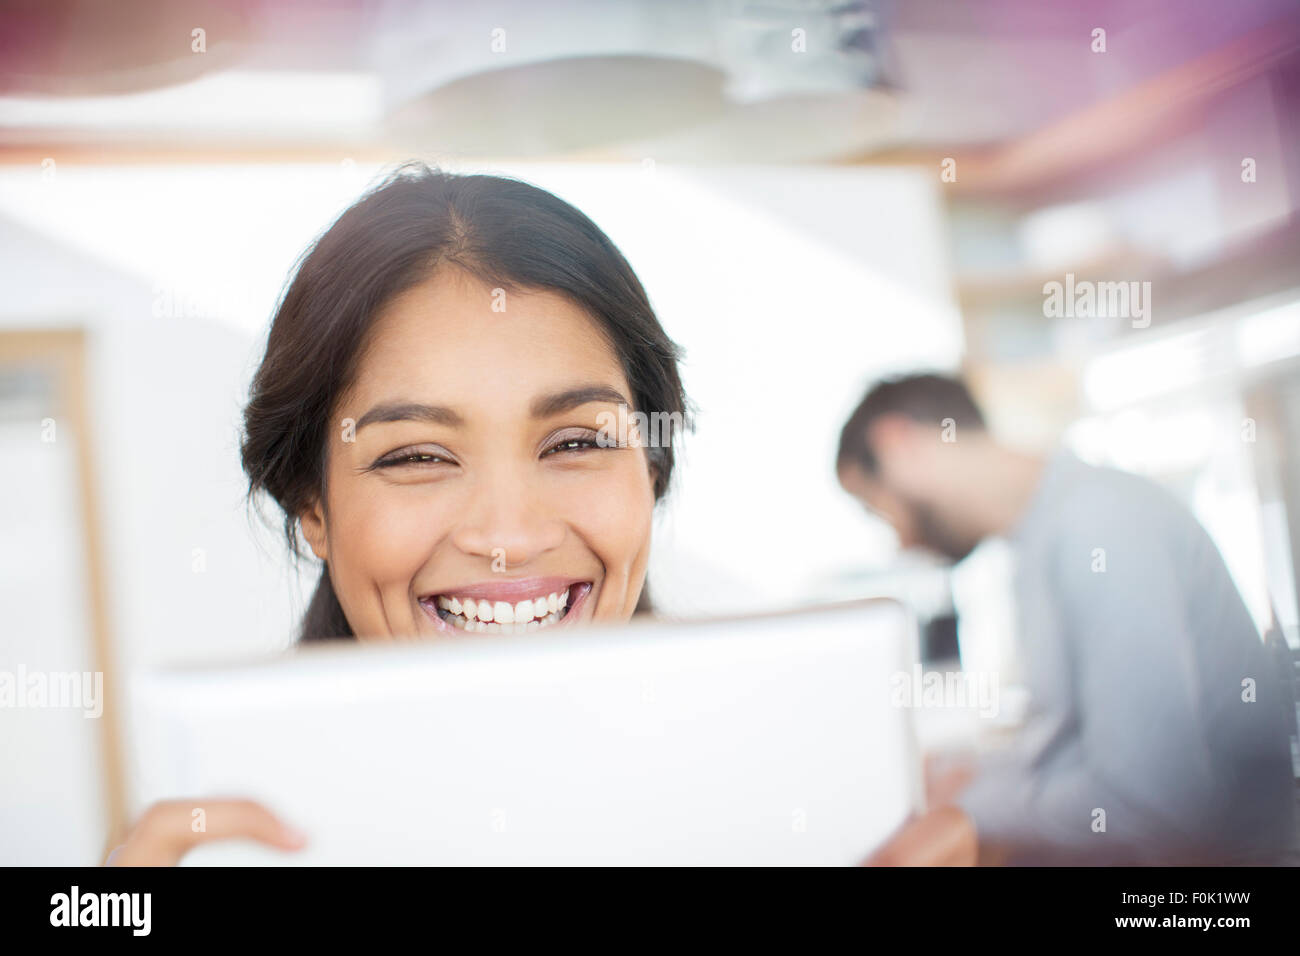 Close up portrait smiling woman using digital tablet Stock Photo